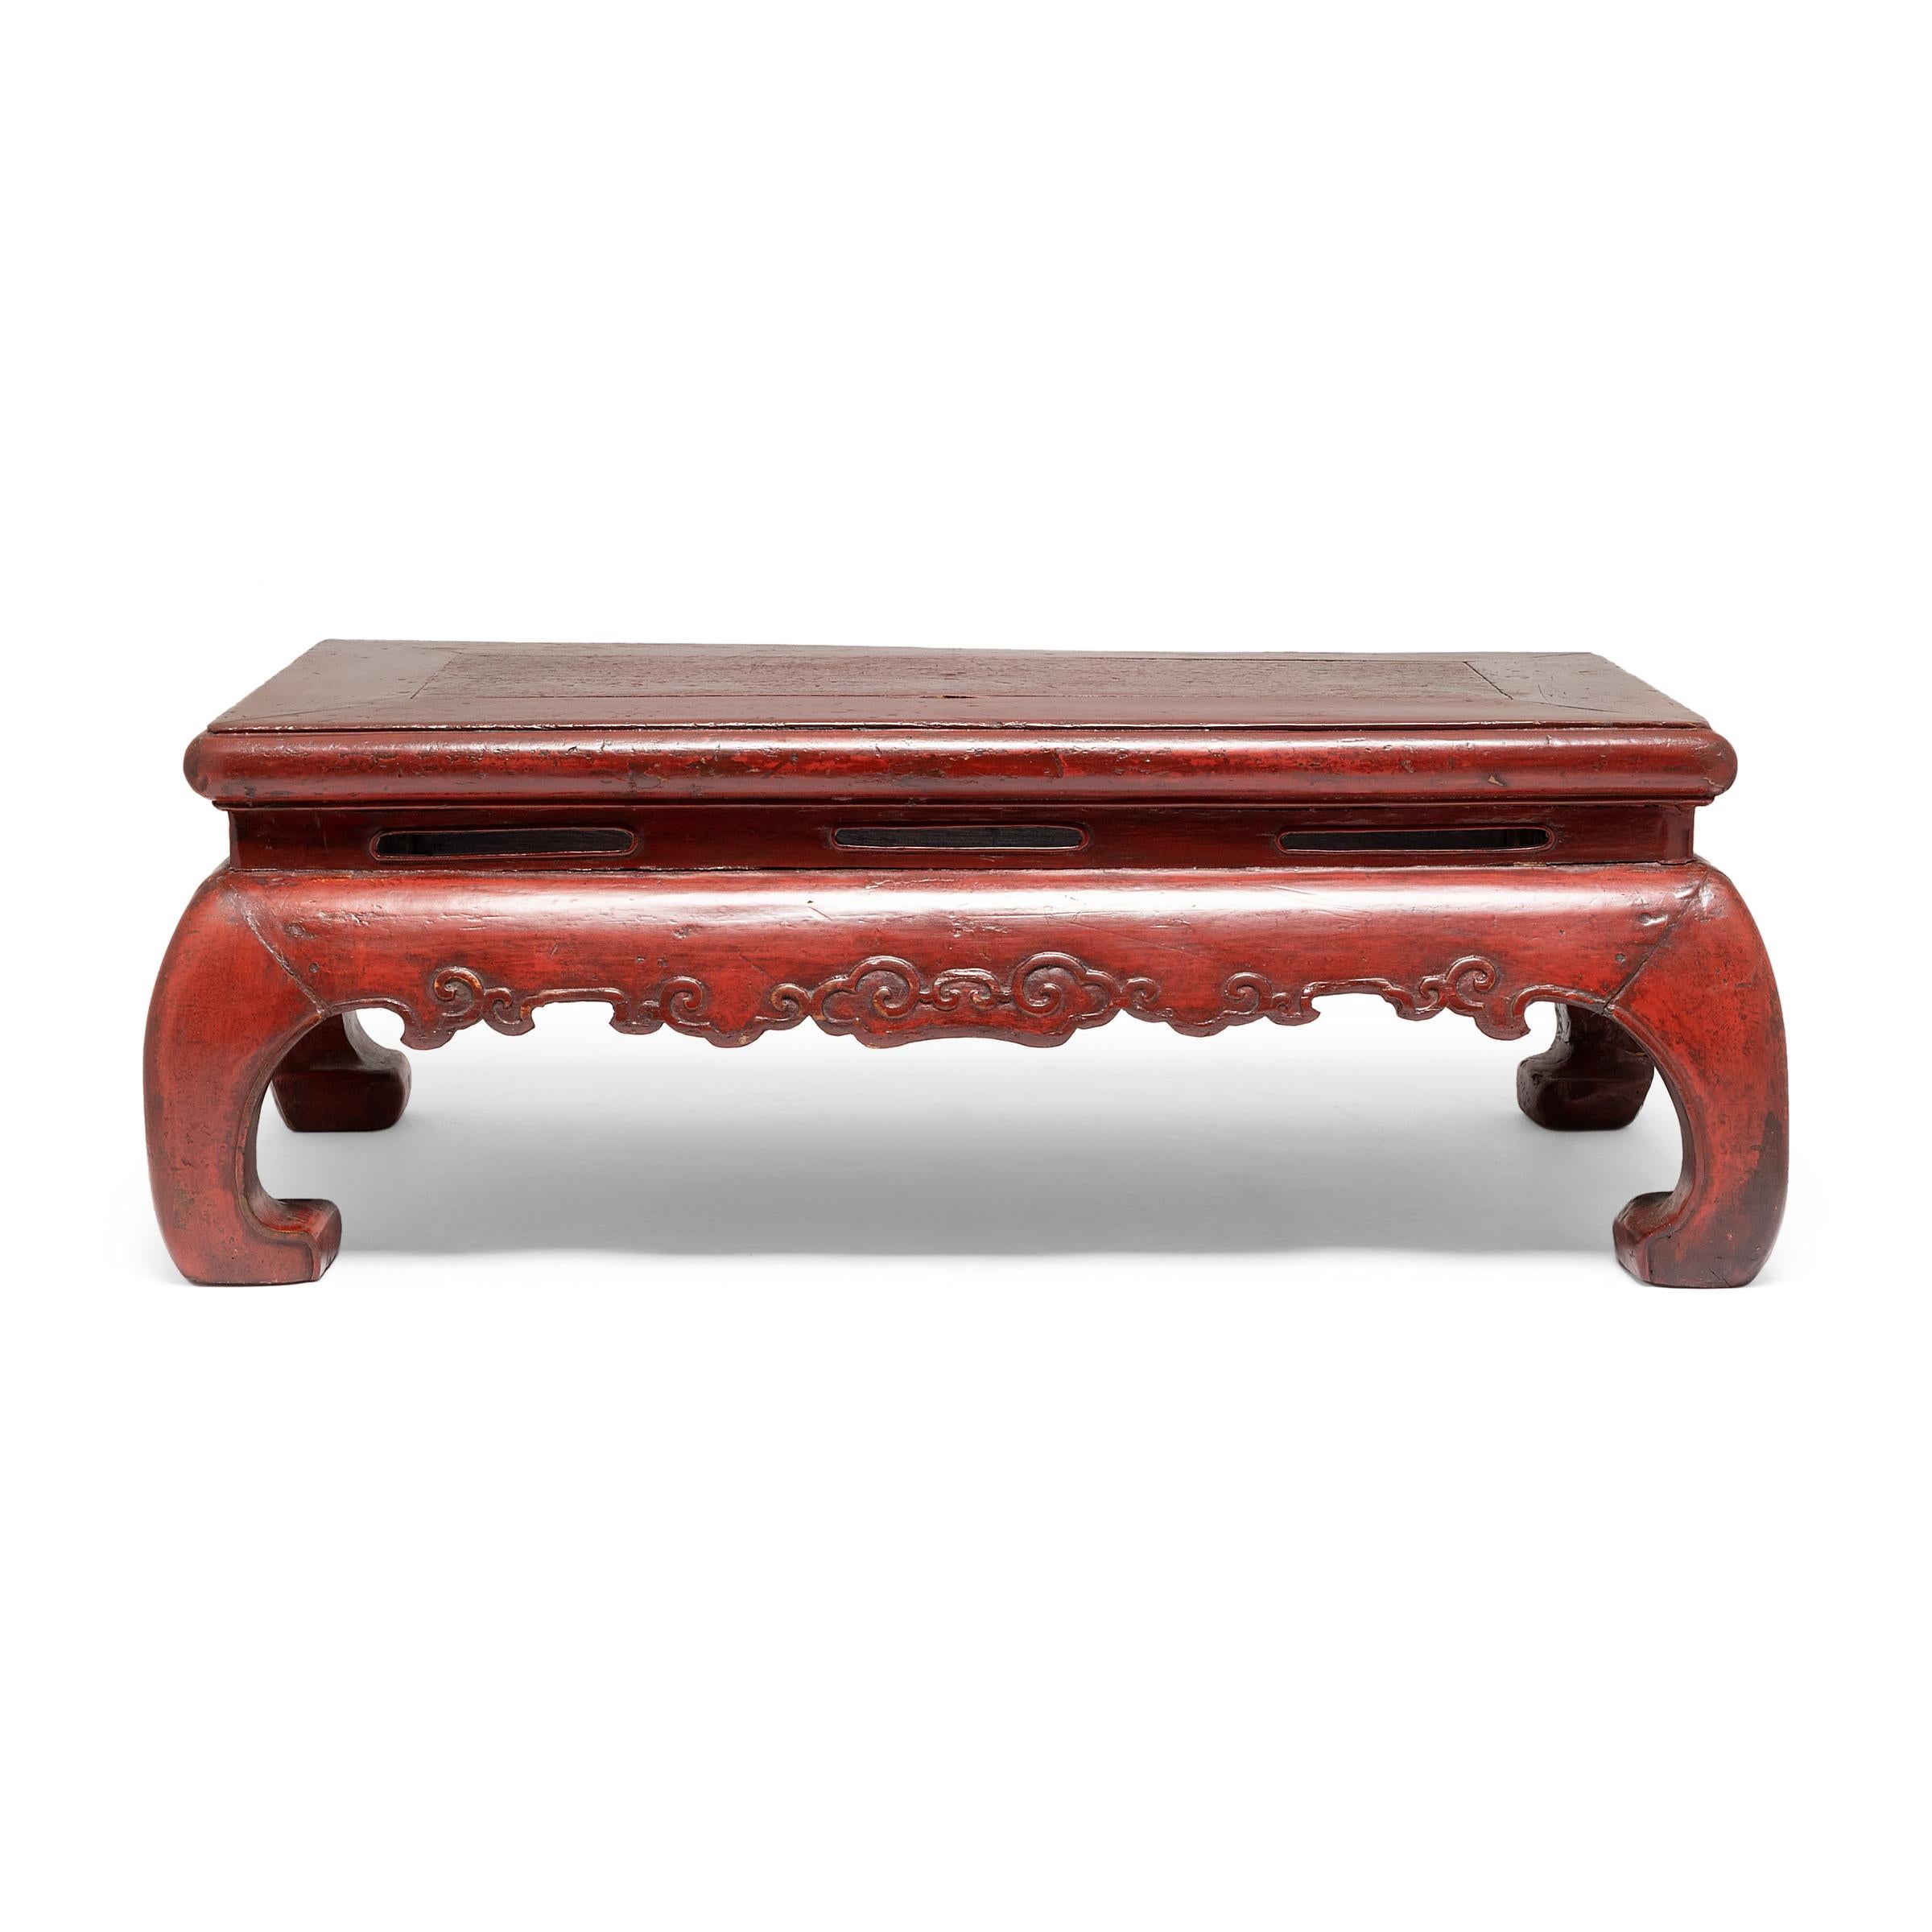 Lacquered Chinese Red Lacquer Kang Table, c. 1900